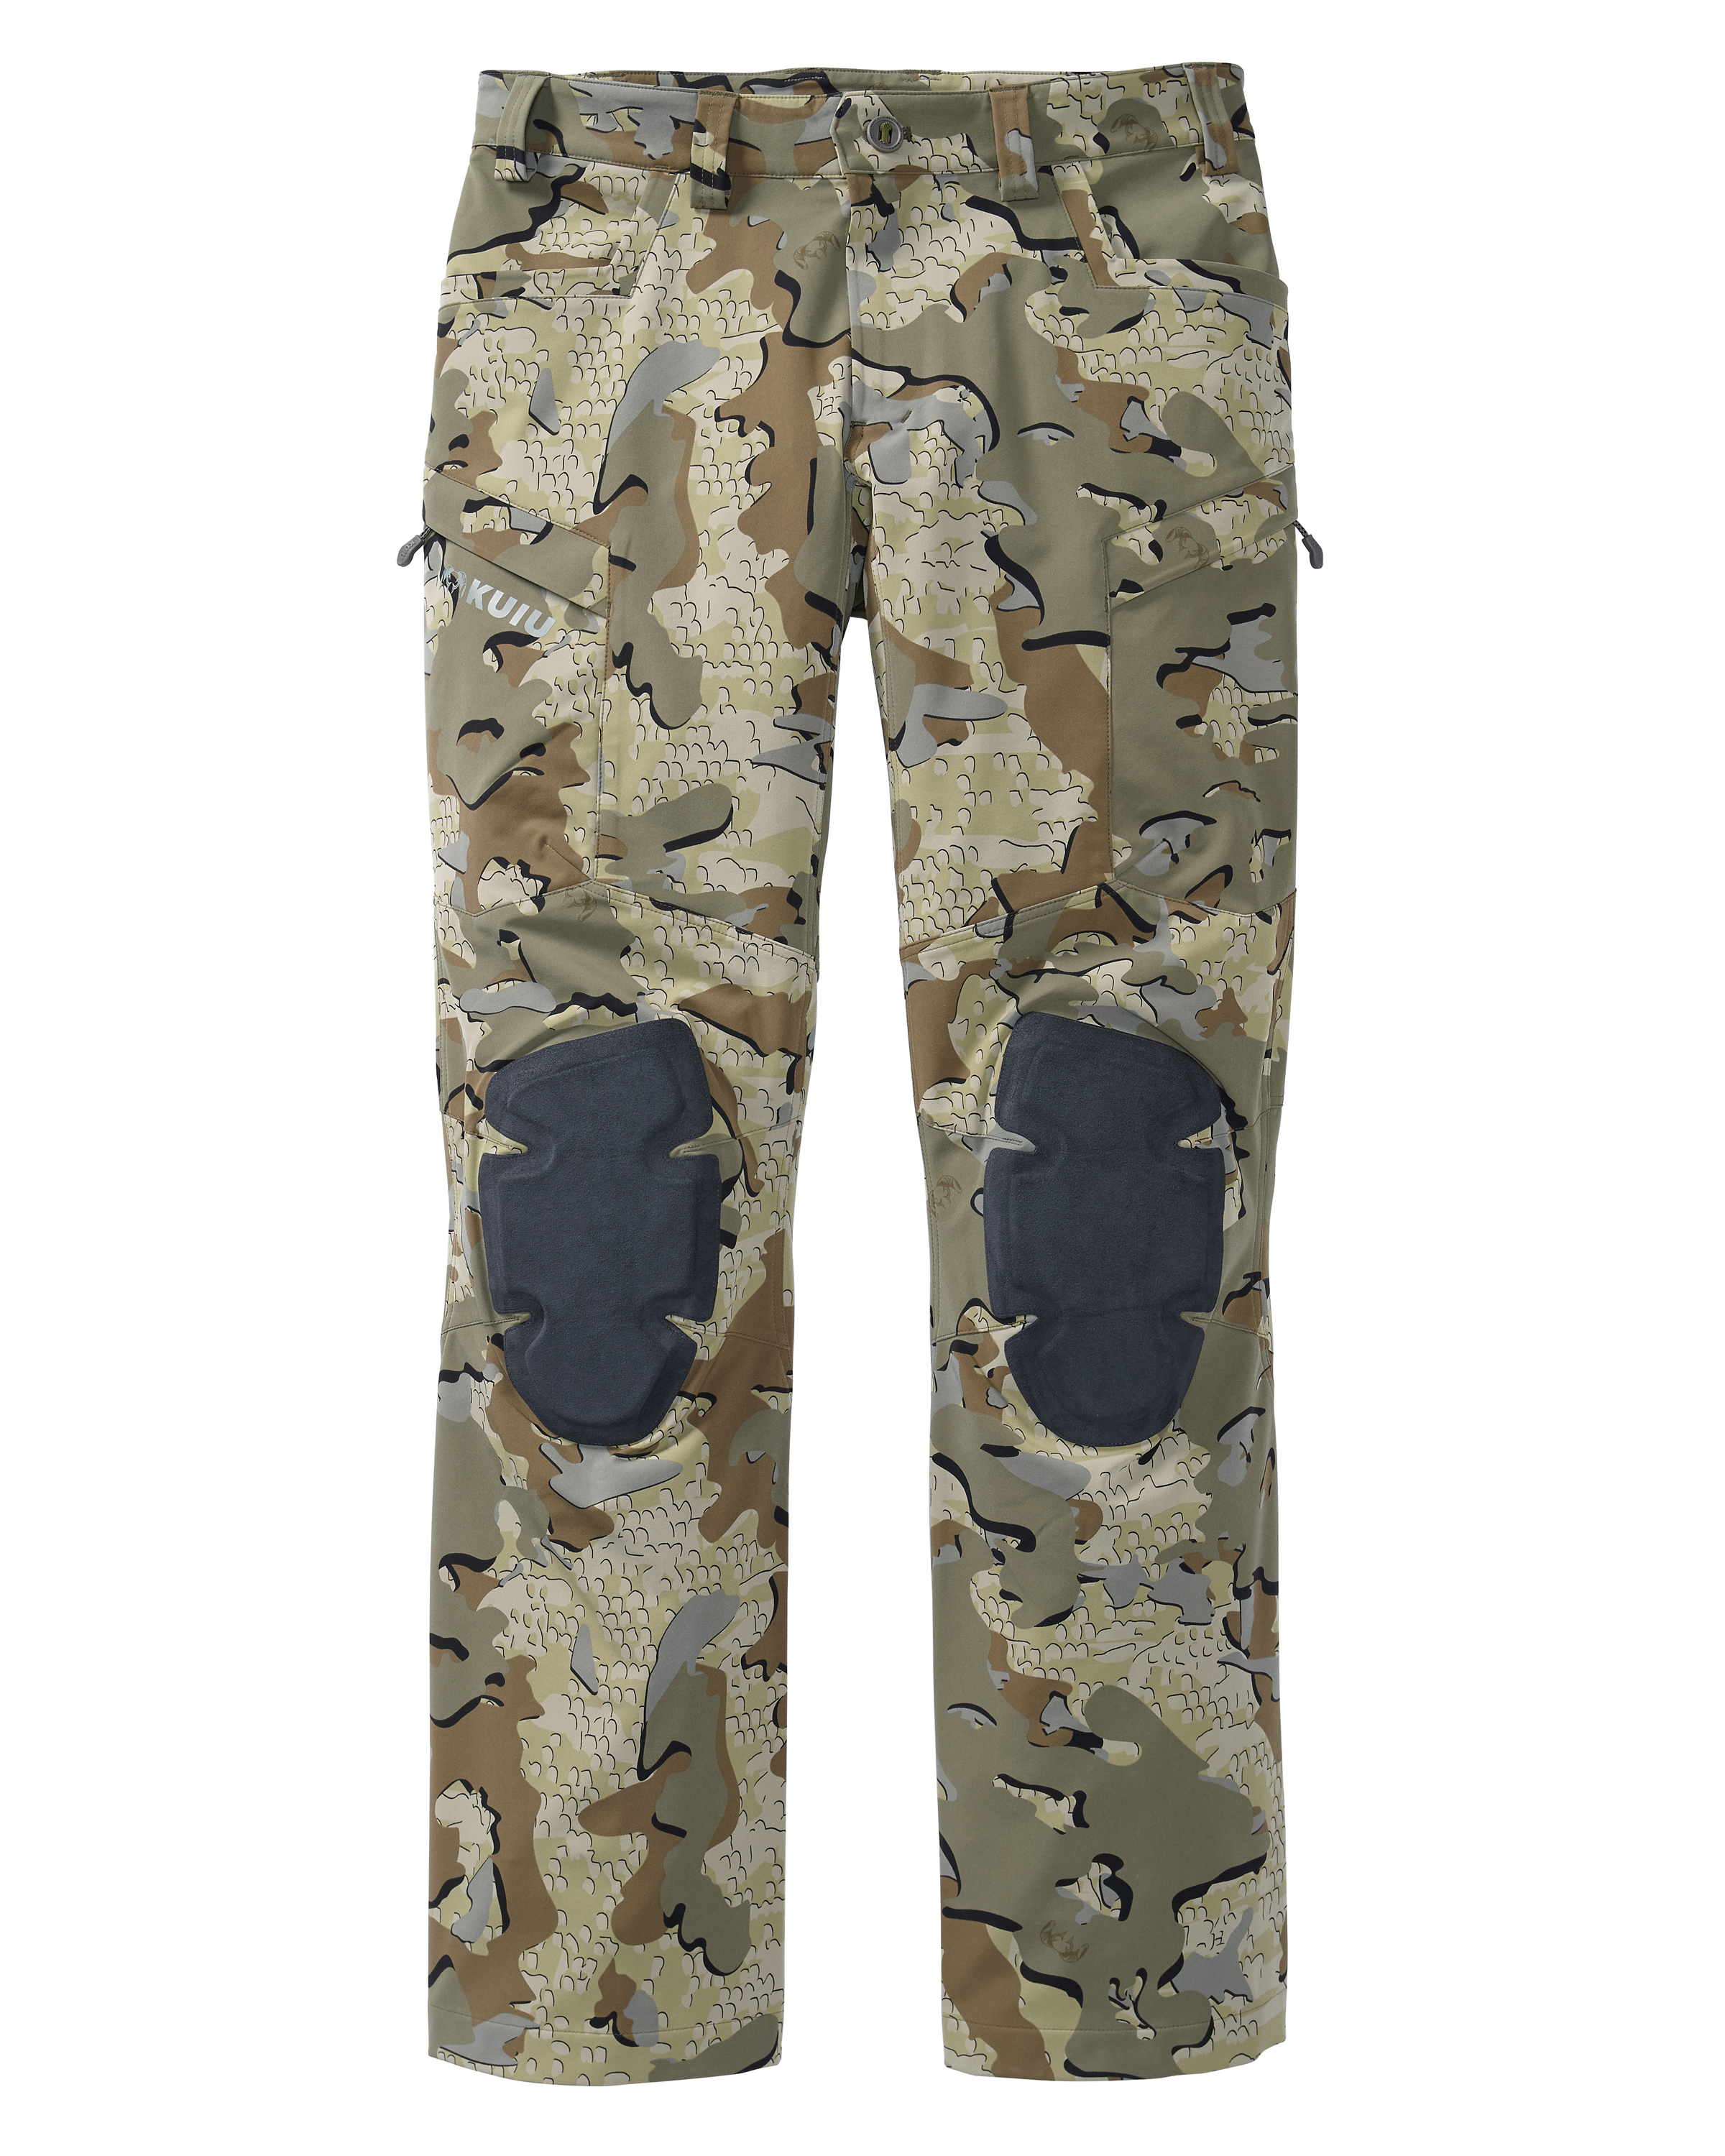 Pro Pant: Hunting Pants with Knee Pads